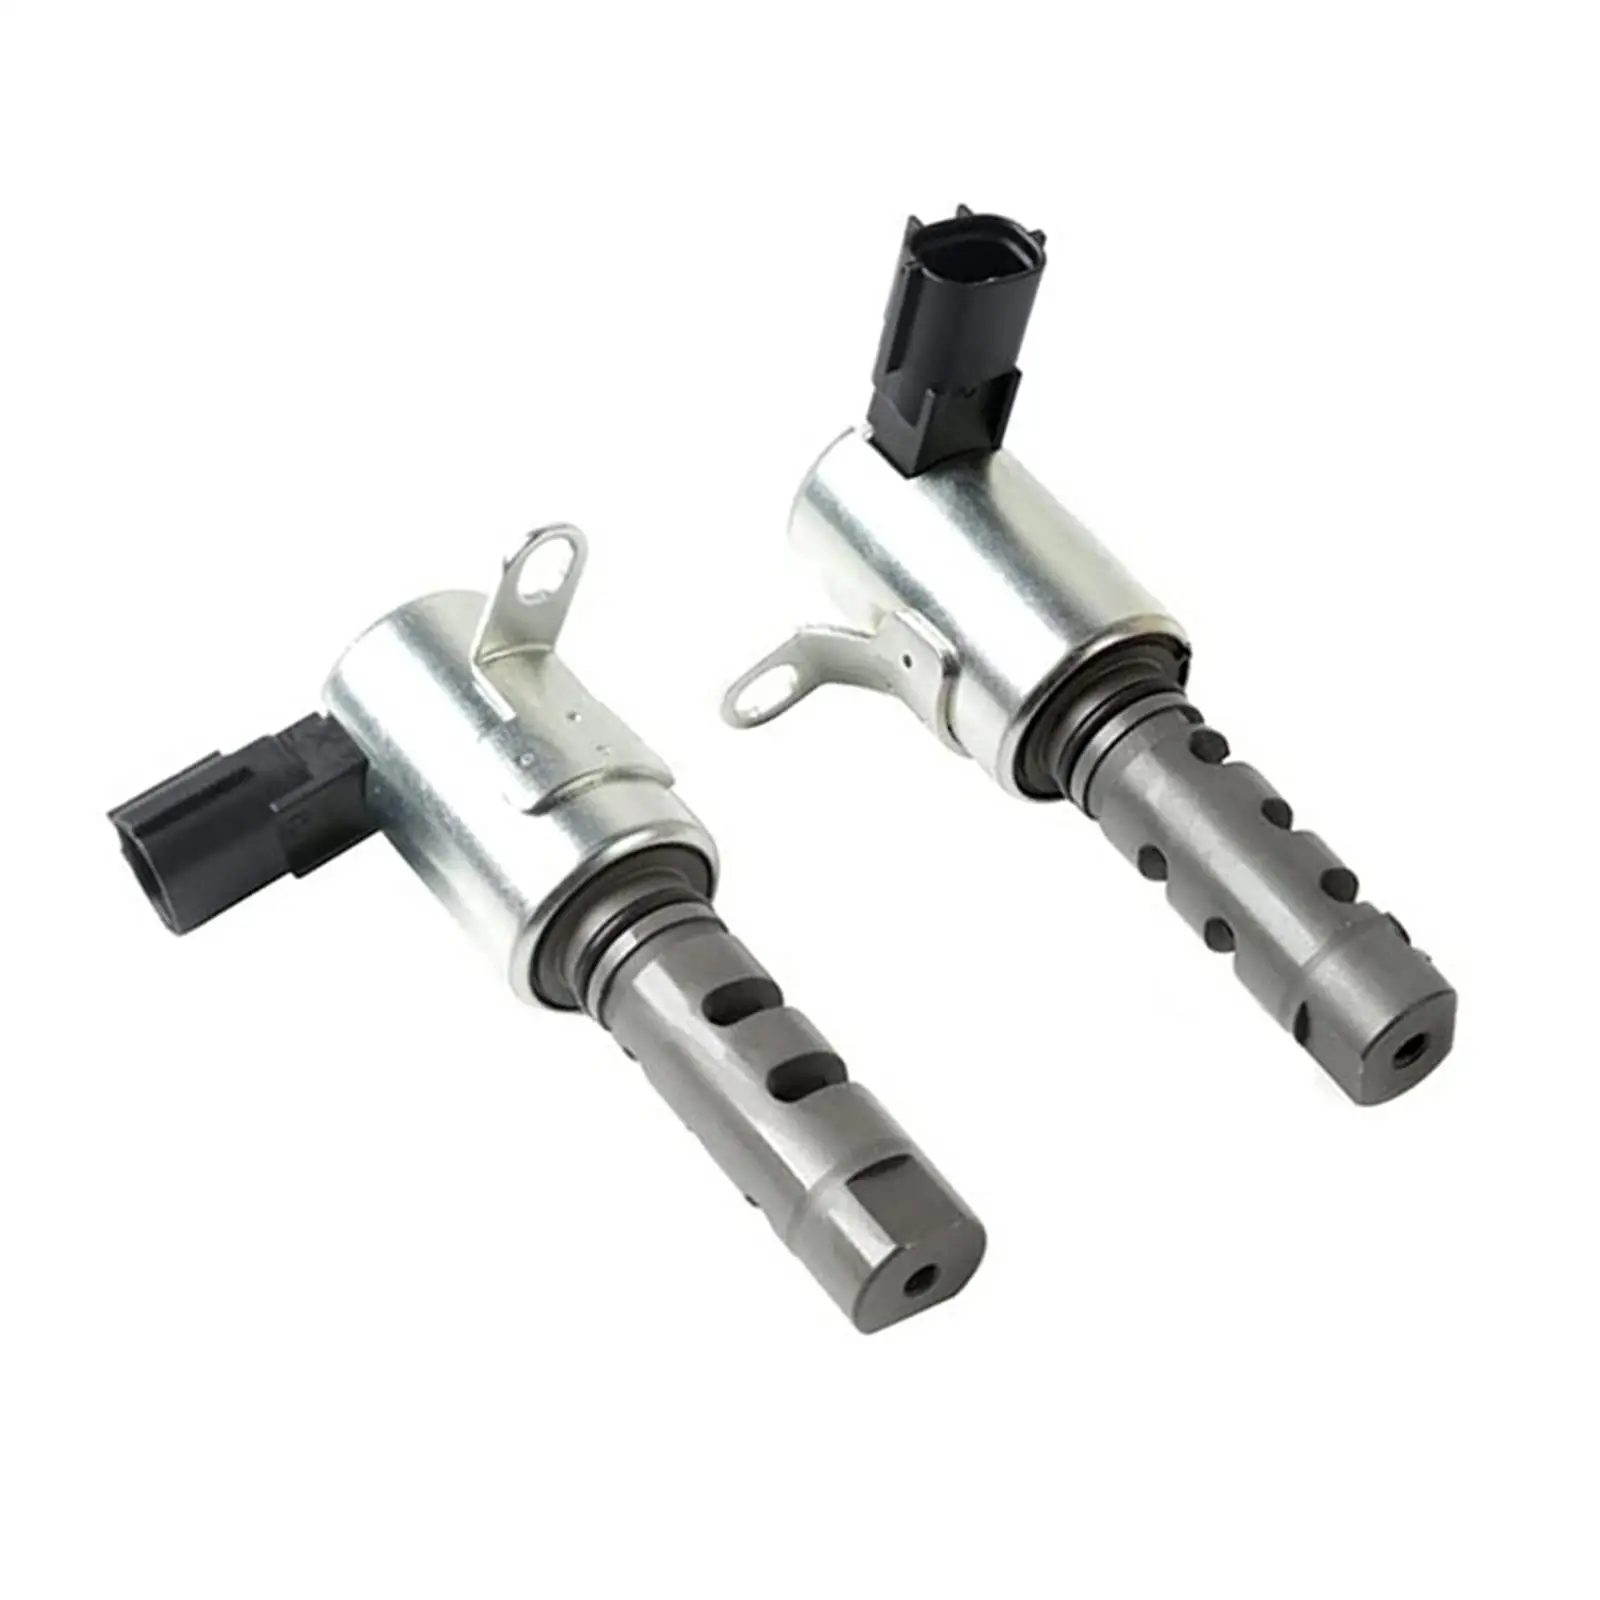 2x Automotive Vvt Valve Variable Timing Solenoid 15330-20010 15340-20010 Left Right Durable Replacement